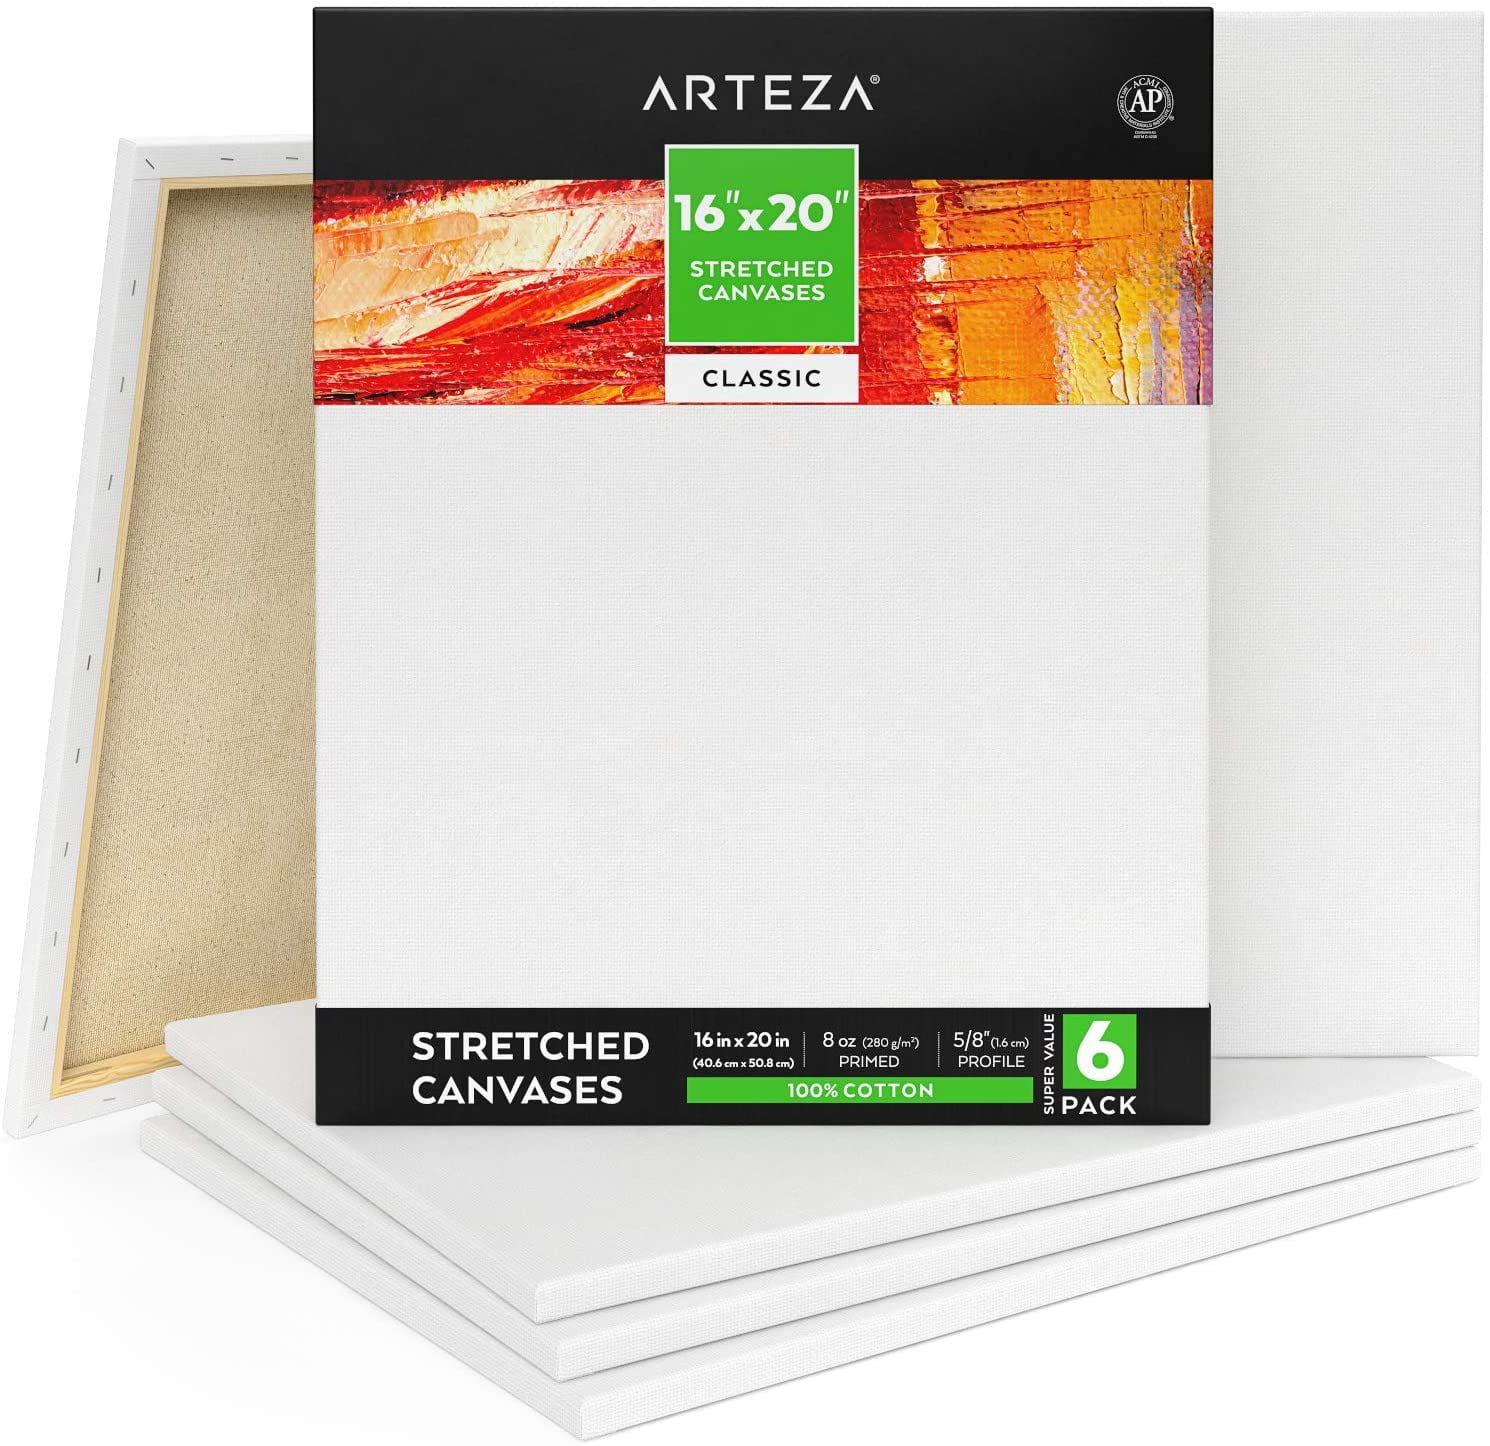 Arteza Stretched Canvas, Classic, White, 16"x20", Large Blank Canvas